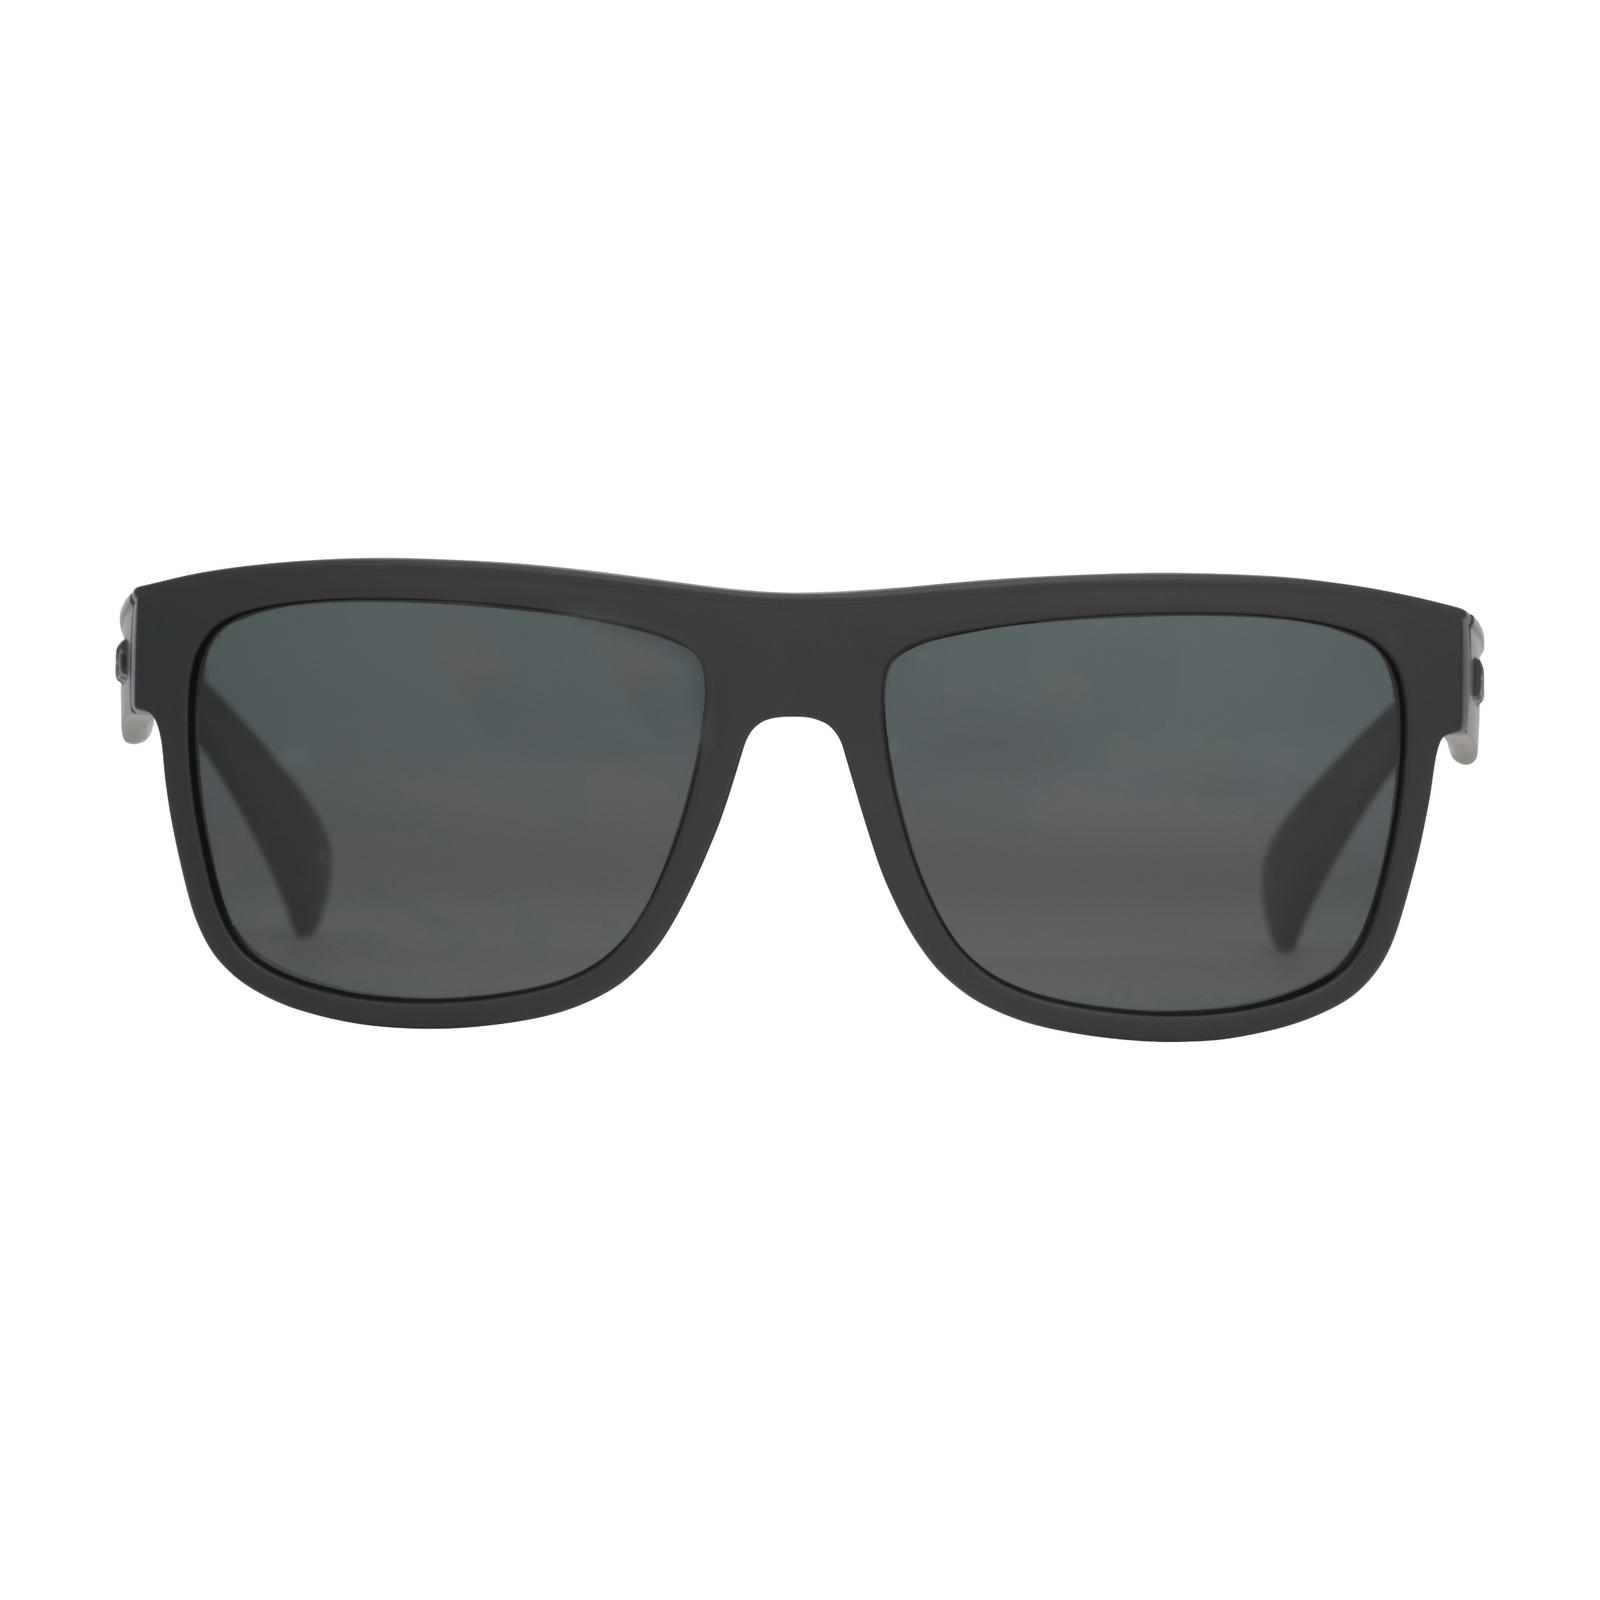 Huk Clinch Matte Black/Gray Lens 125 FRONT VIEW